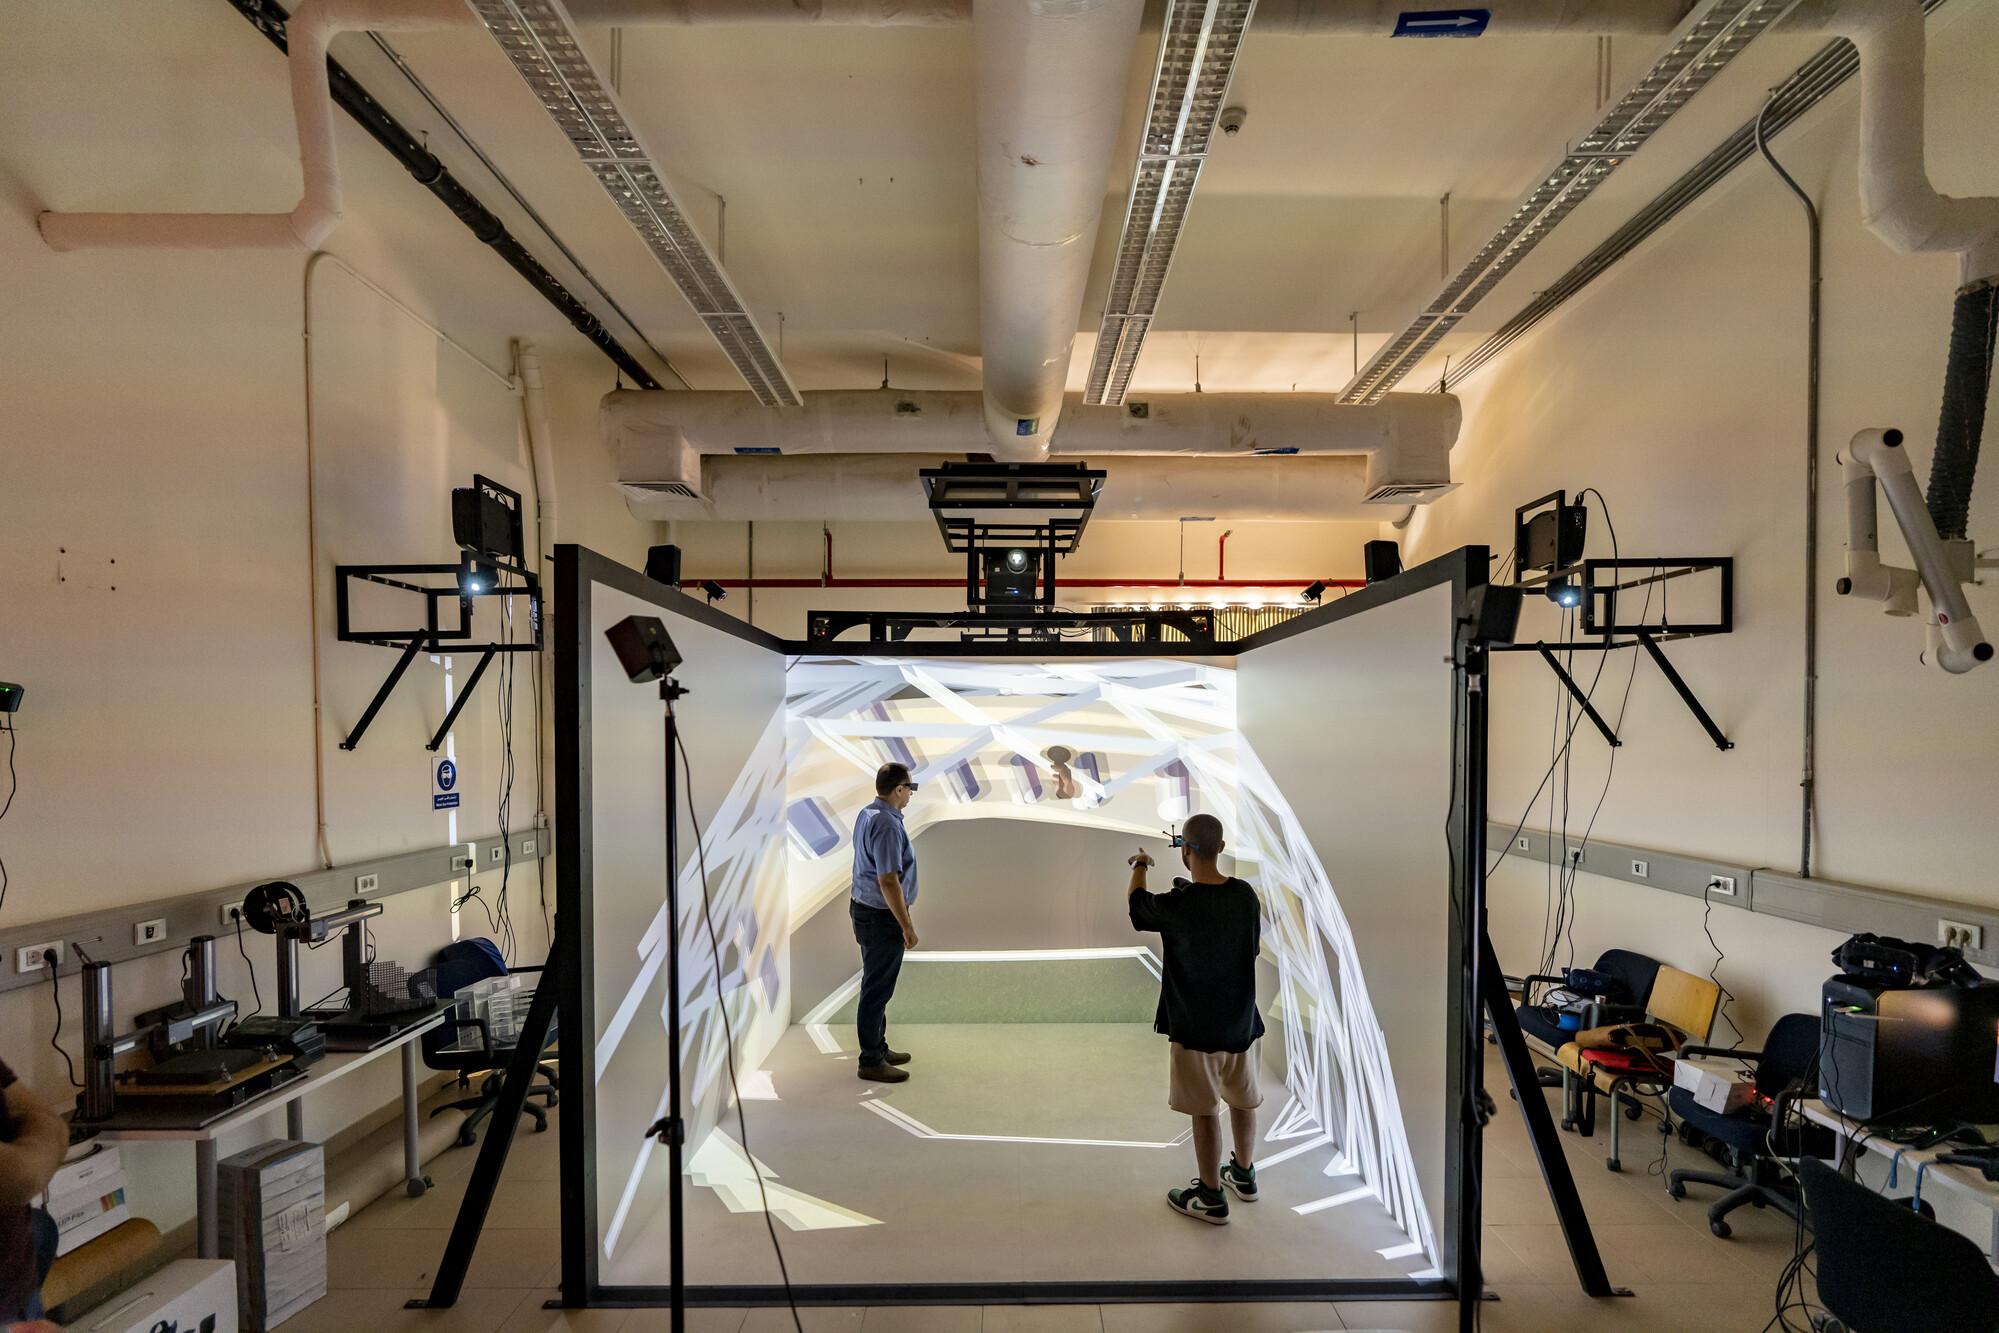 VR lab and with its equipment and projector